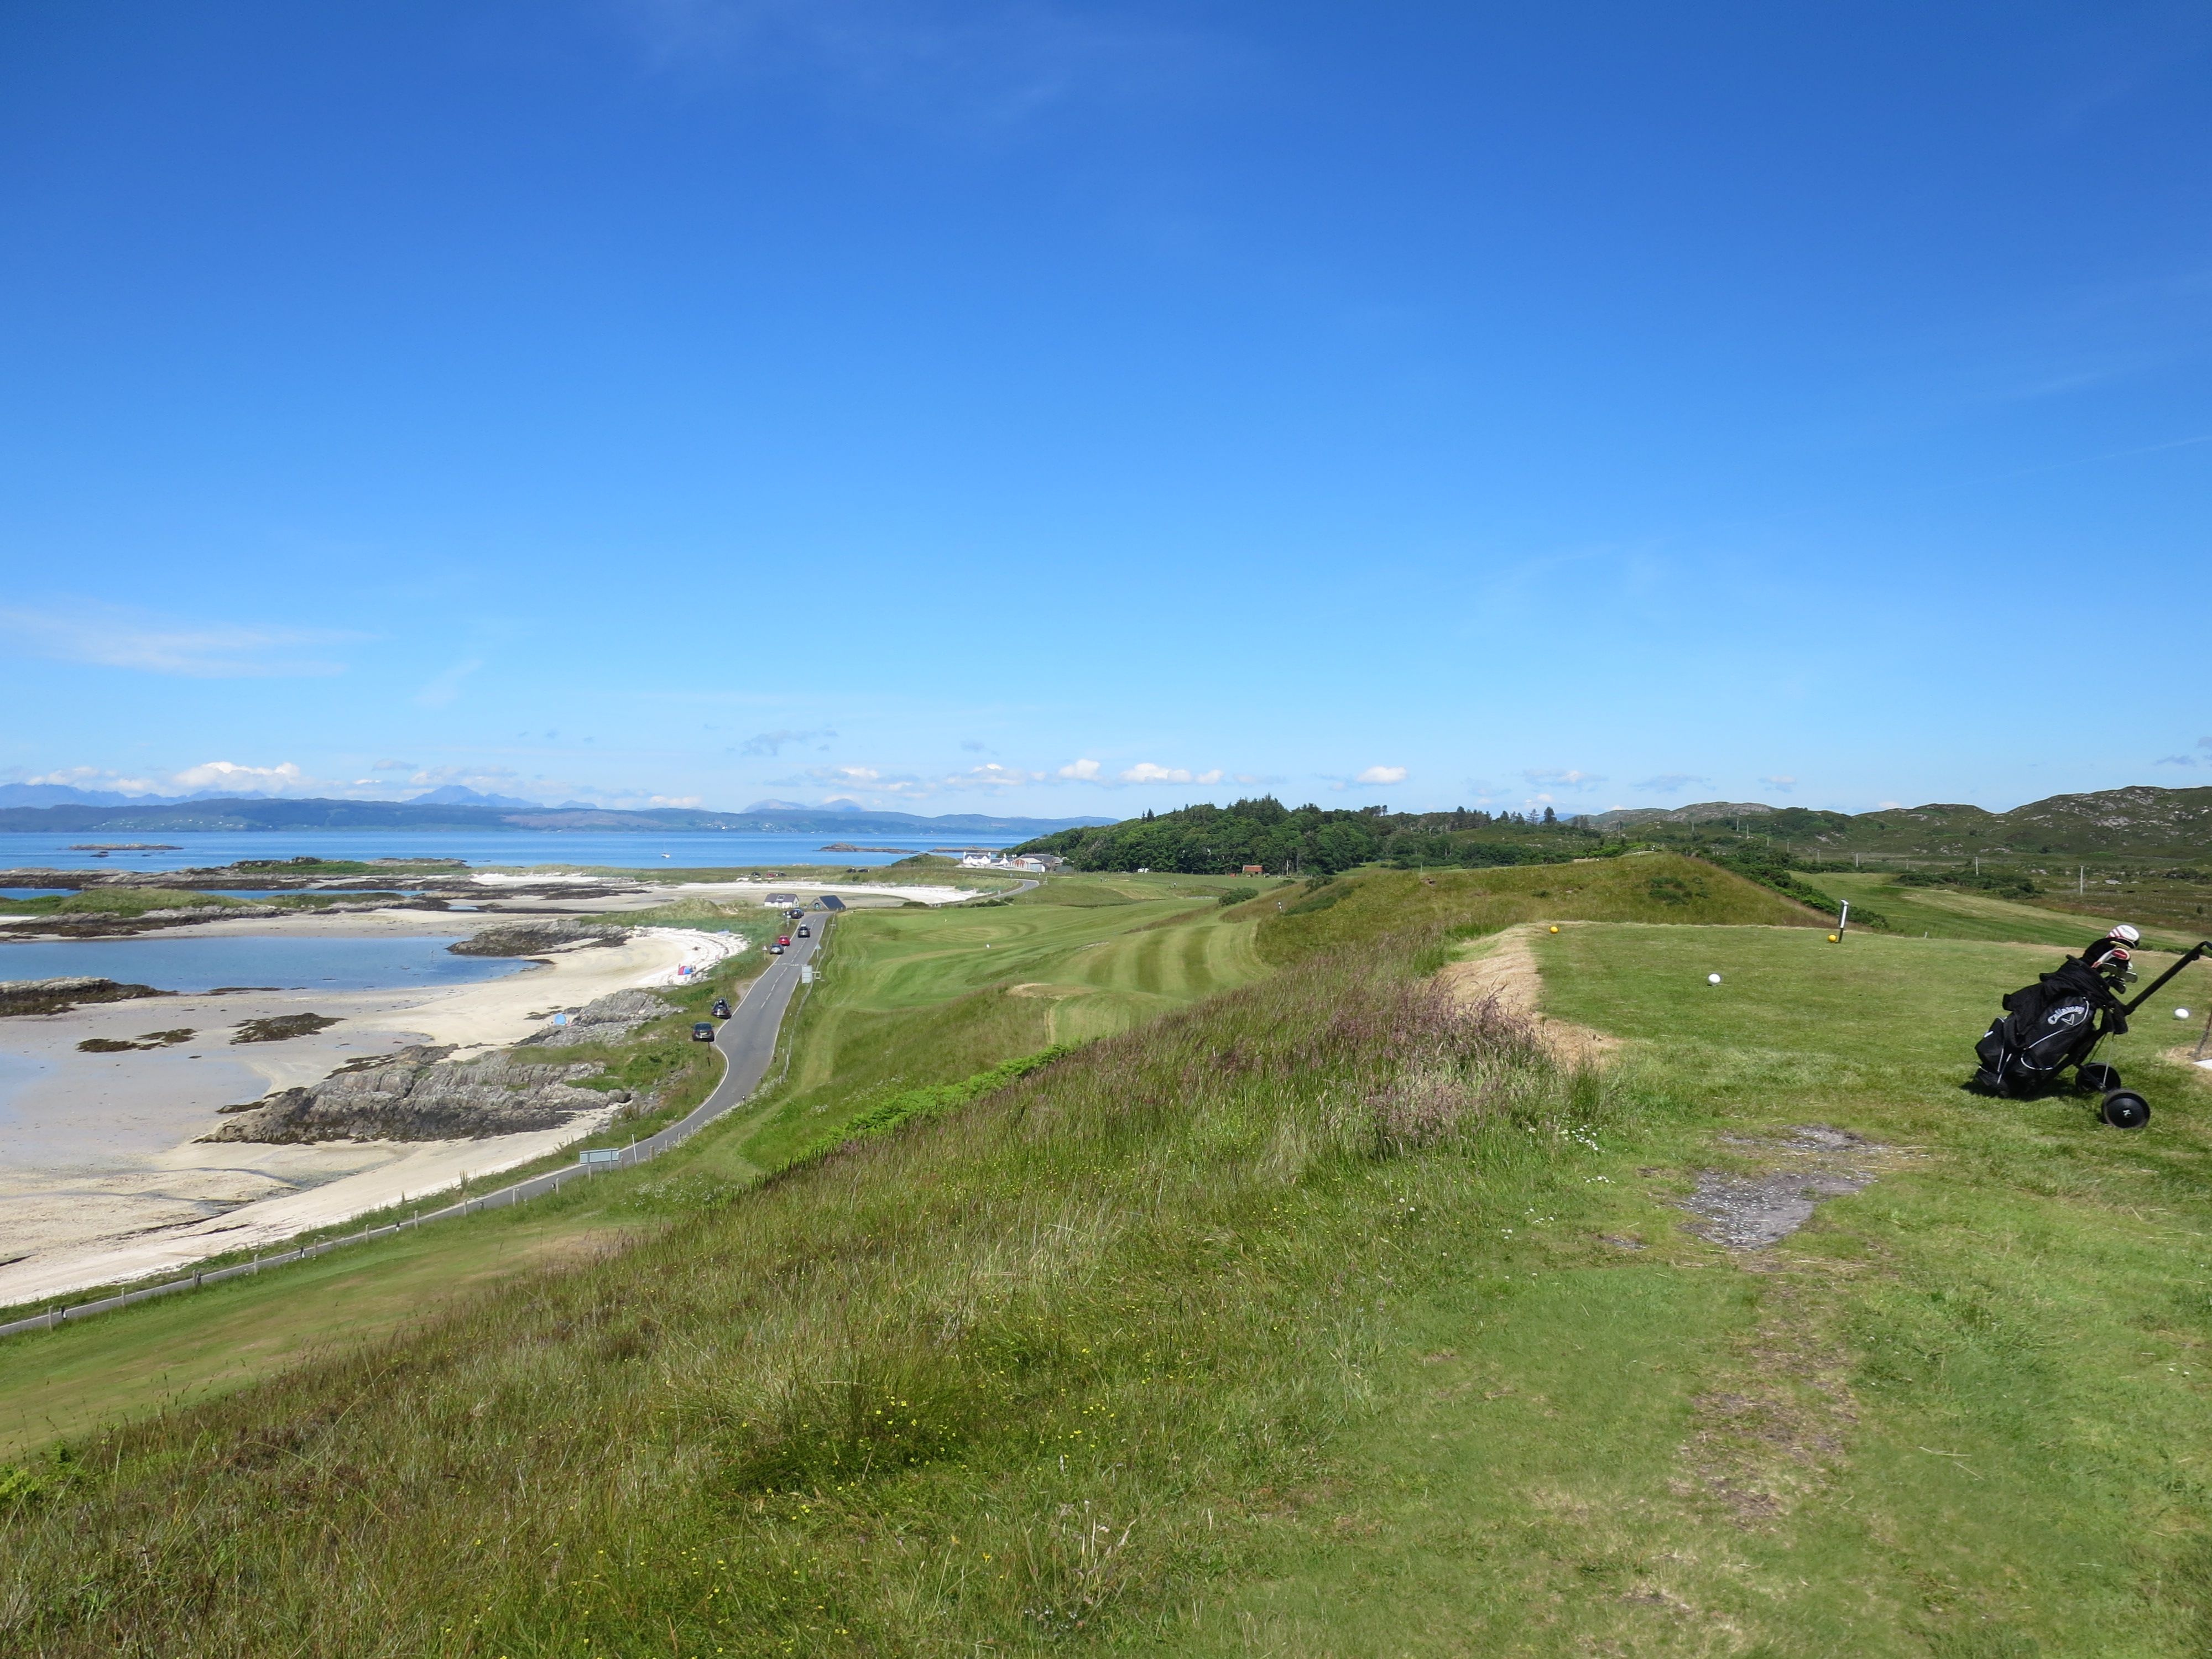 Little 9-holer Traigh is a gorgeous off-the-beaten path delight.